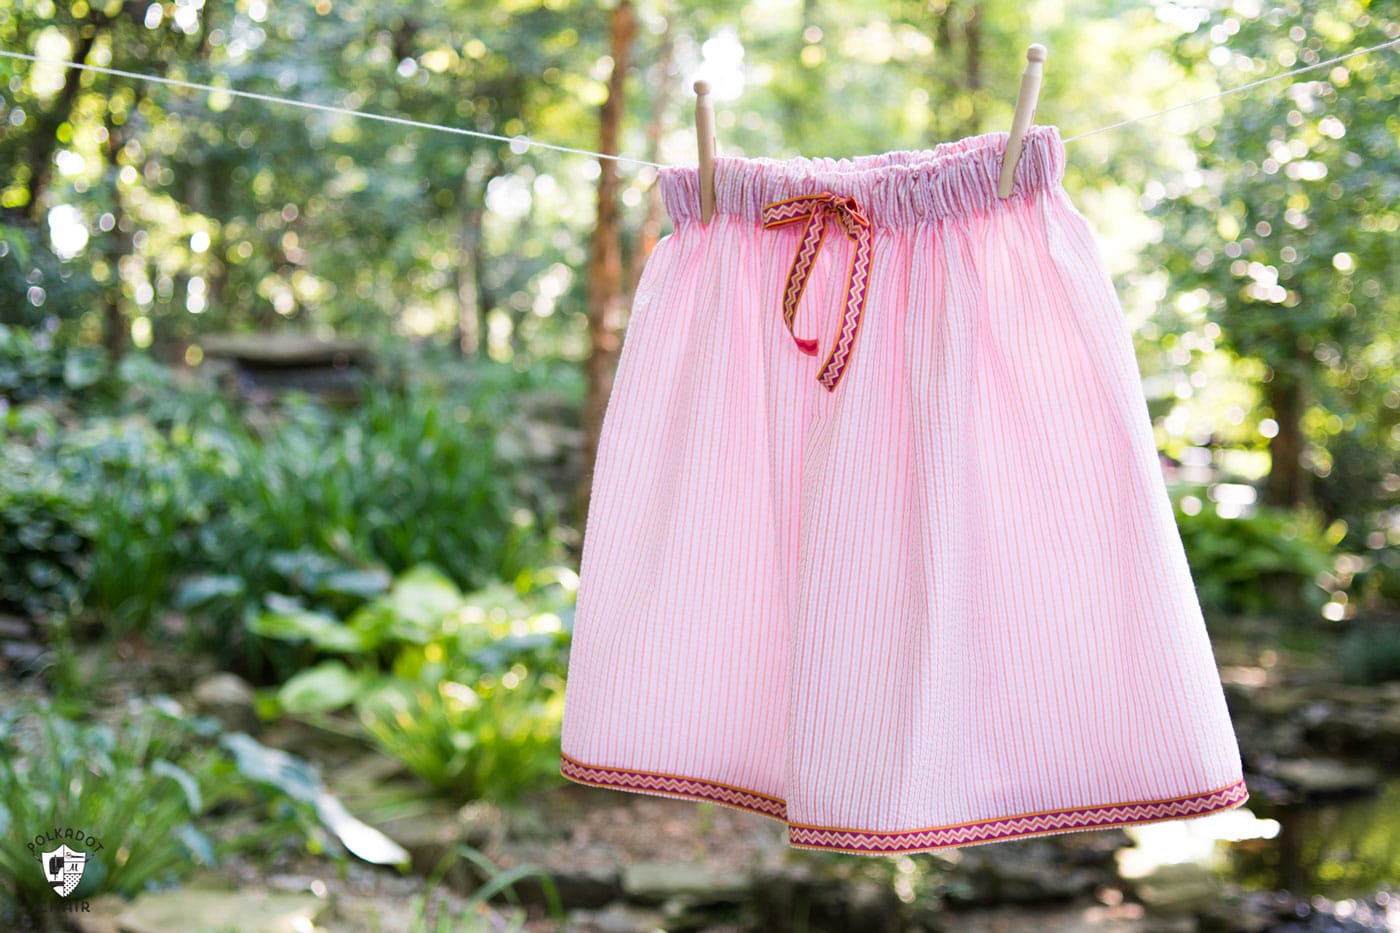 How to sew a simple skirt perfect for summer. A really cute as a seersucker skirt sewing tutorial!